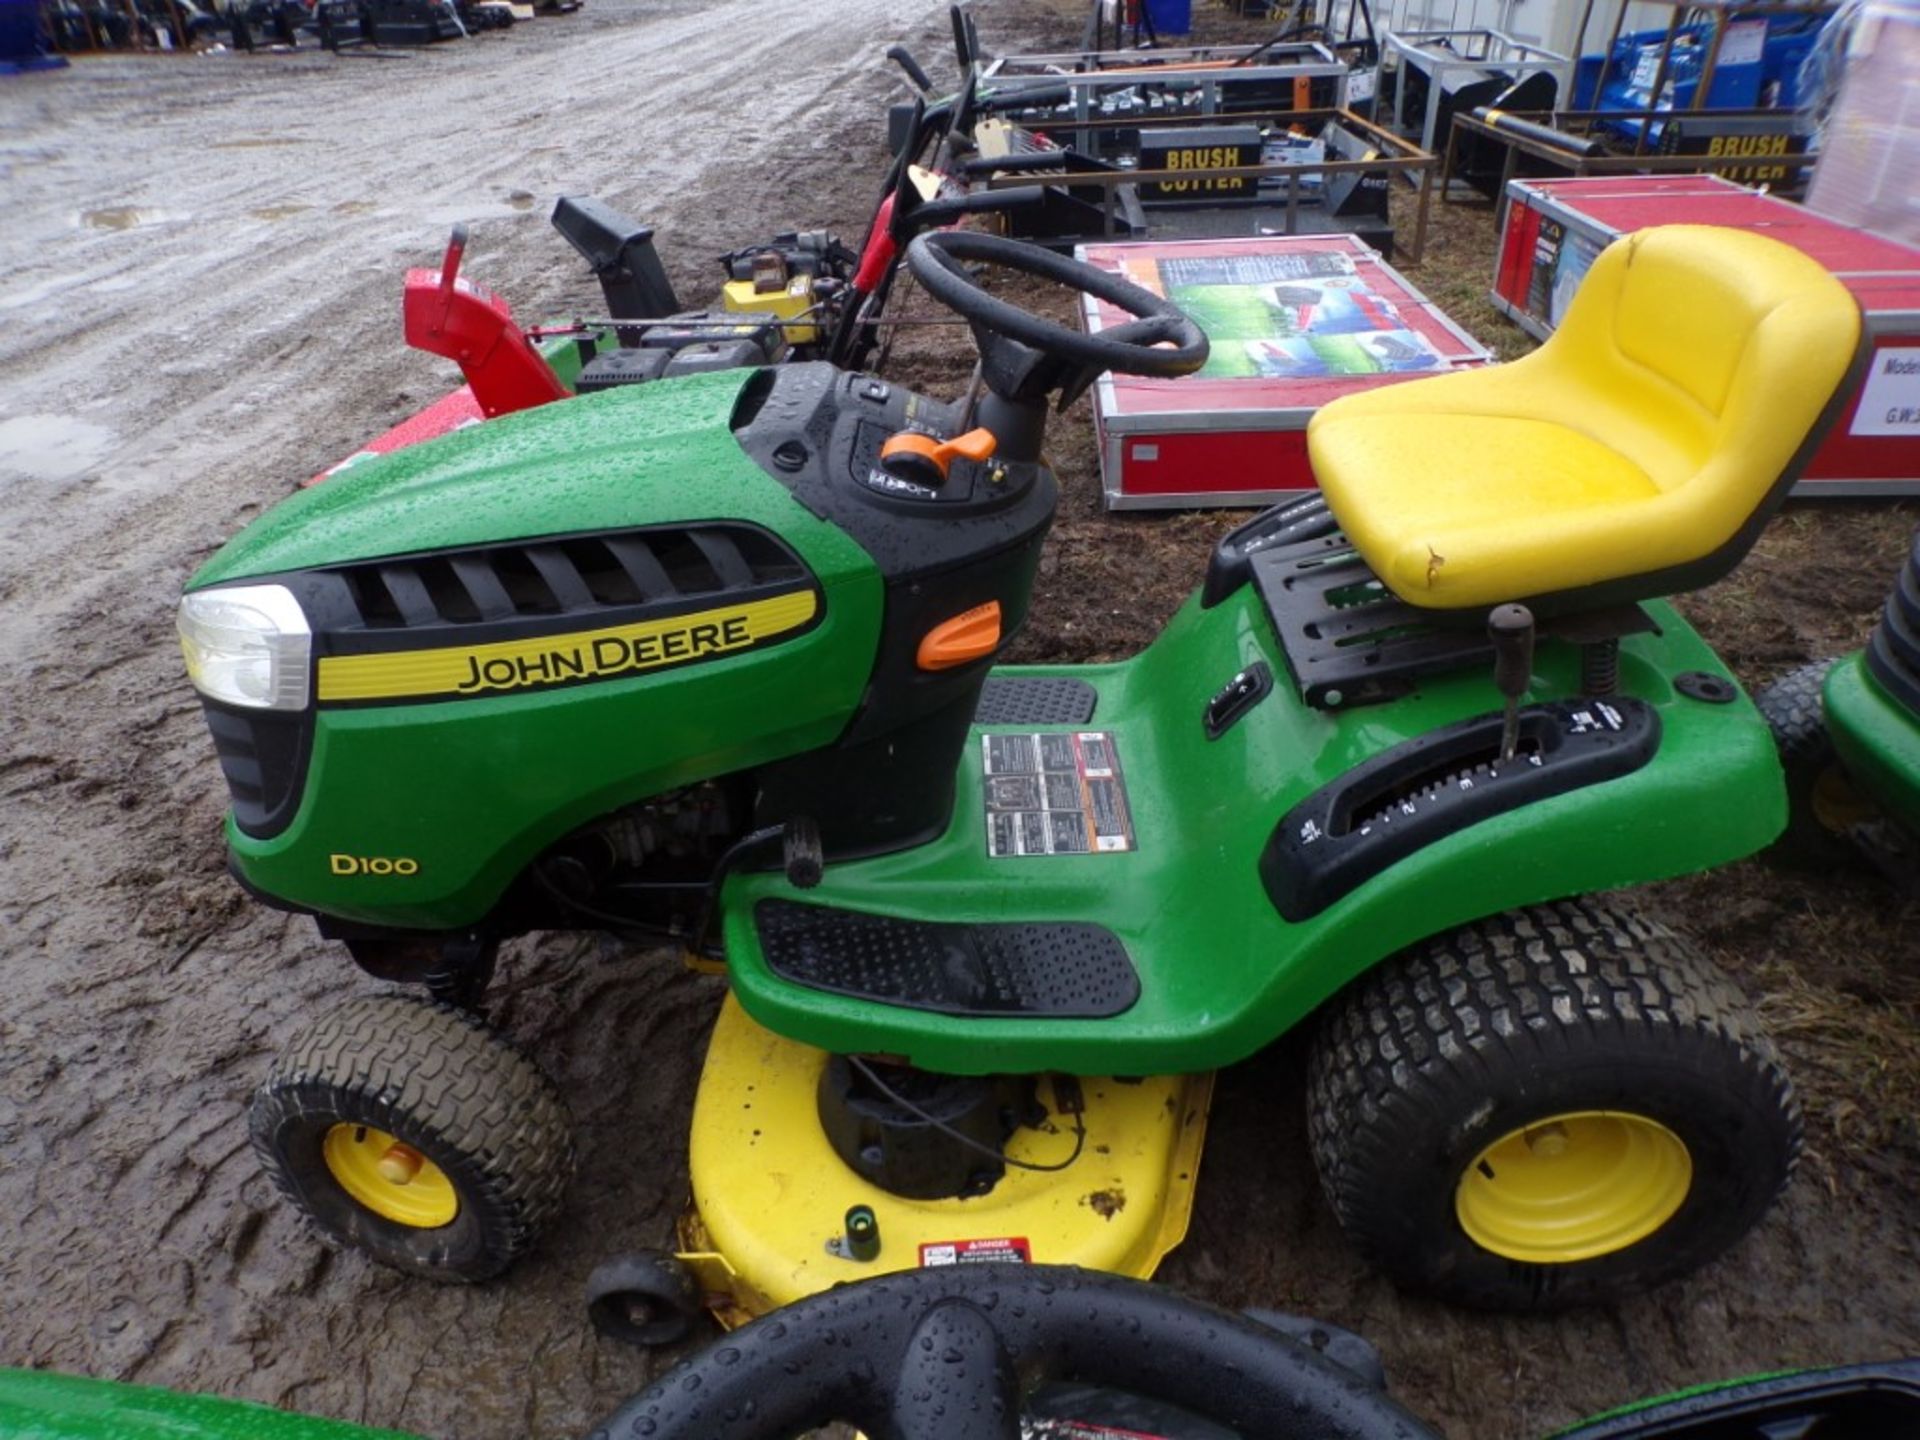 John Deere D100 Riding Mower with 42'' Deck, 175 HP Briggs and Stratton Engine, 257 Hrs (PAINT IS